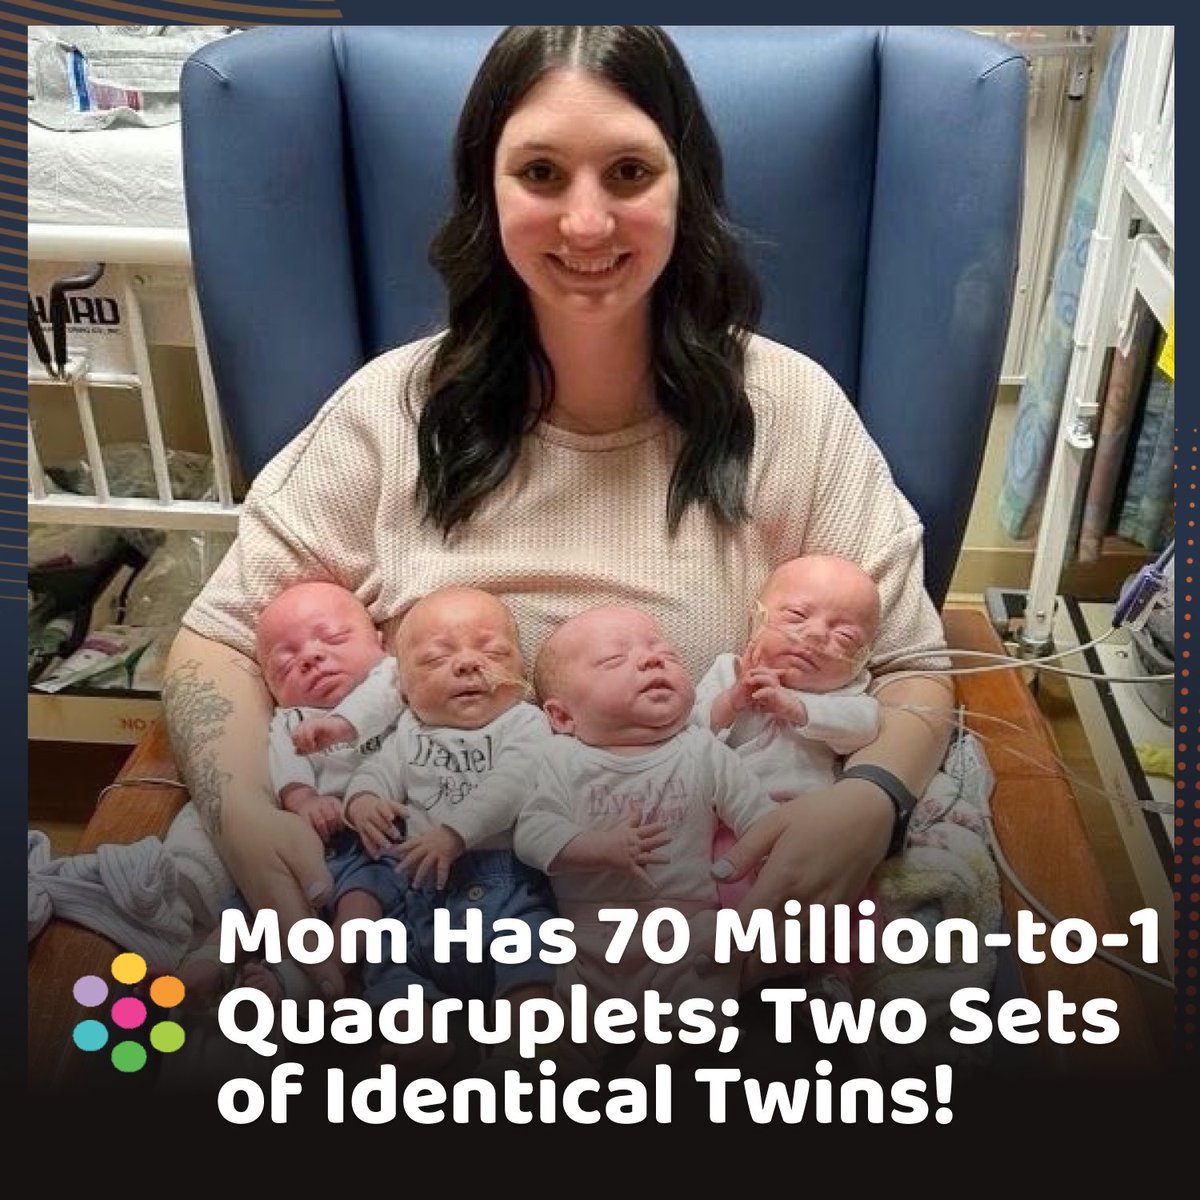 They Weren’t Even Trying to Get Pregnant!! Mom Has 70 Million-to-1 Quadruplets—Two Sets of Identical Twins

#goodnews